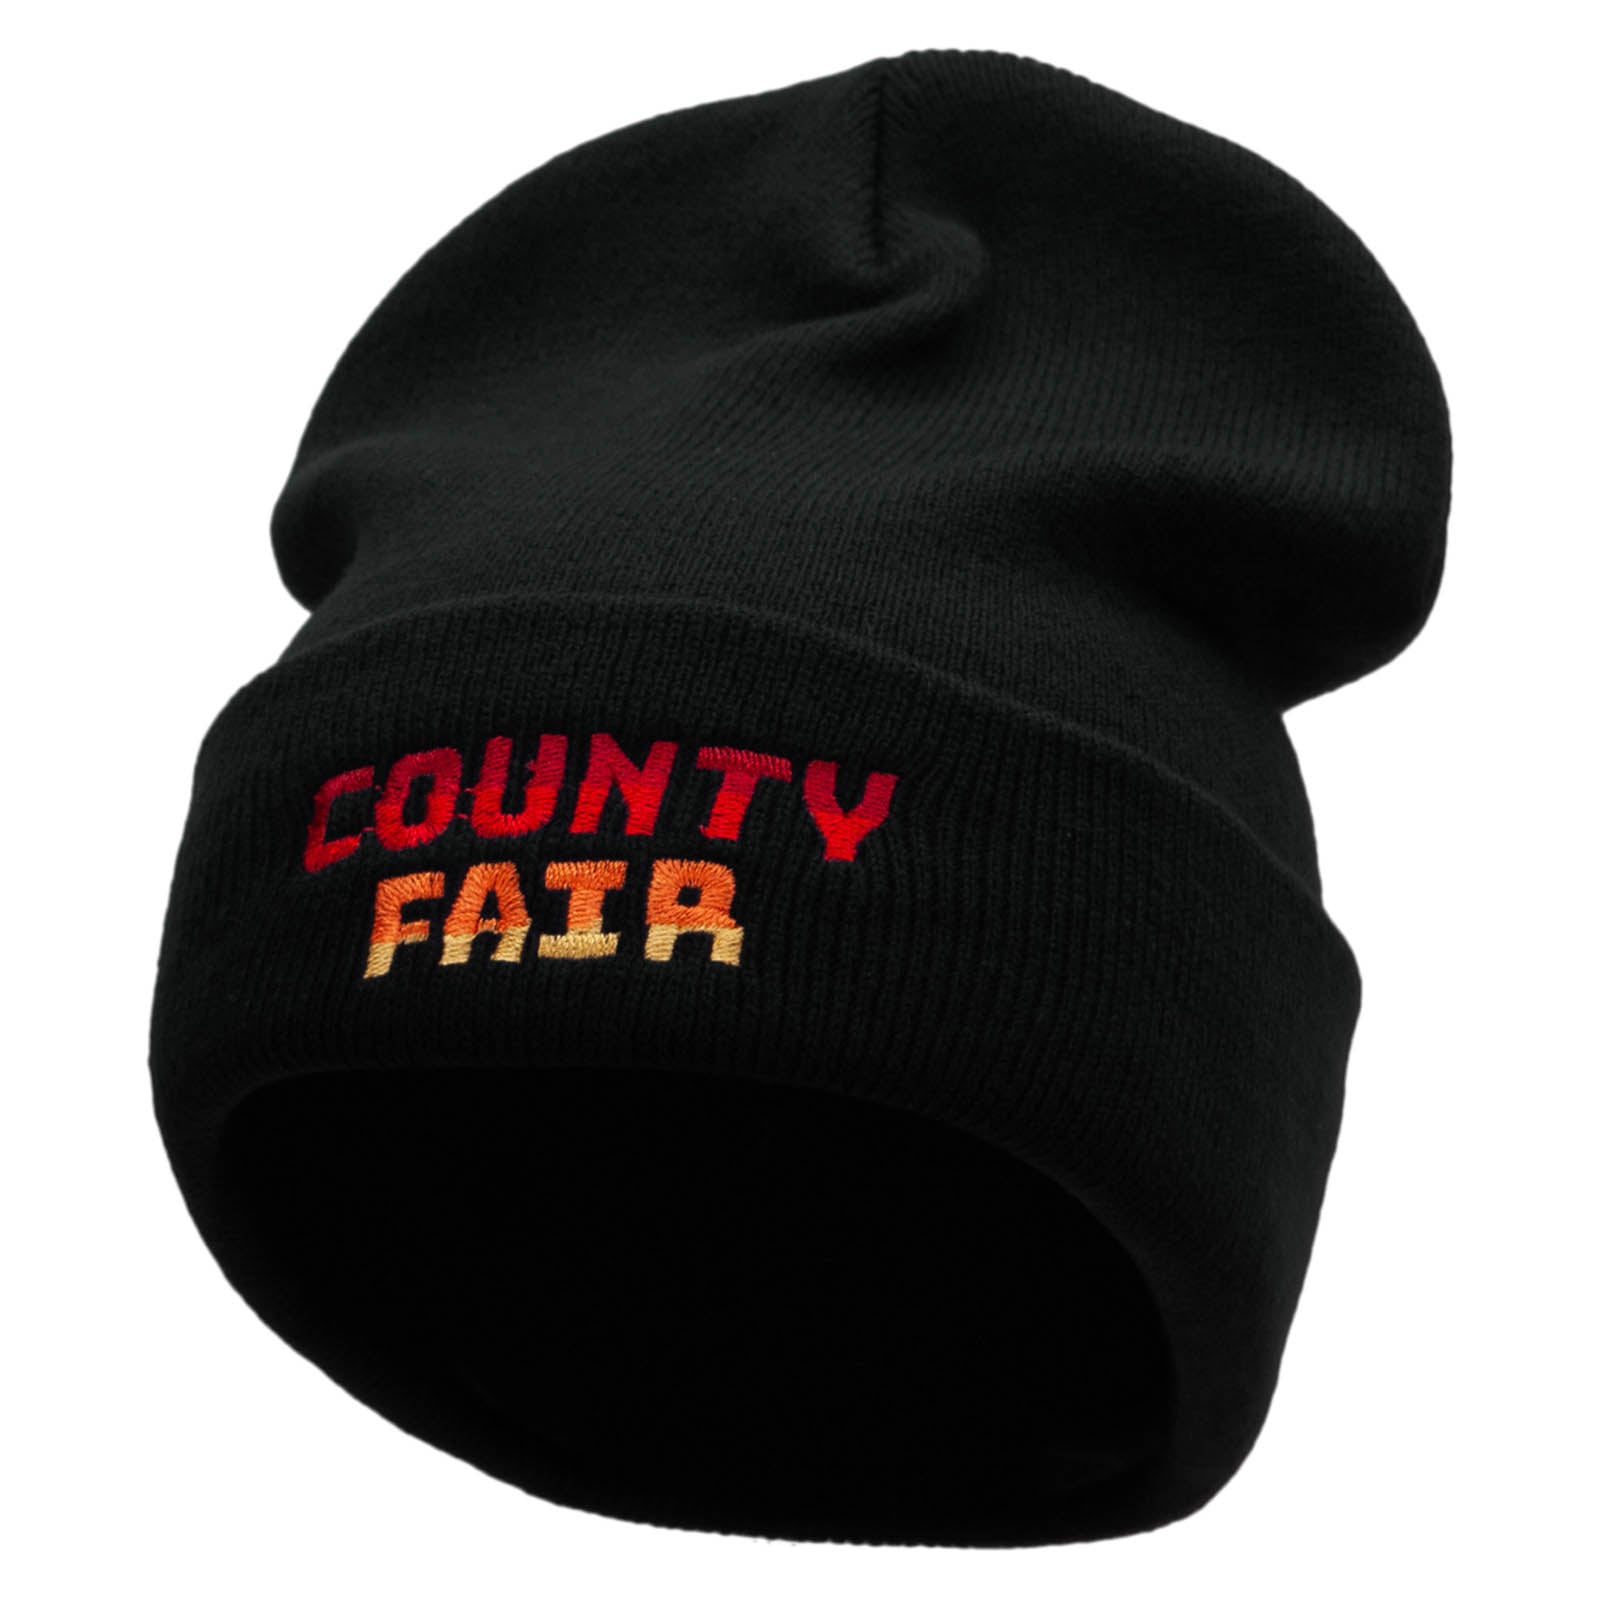 County Fair Embroidered 12 Inch Long Knitted Beanie - Black OSFM